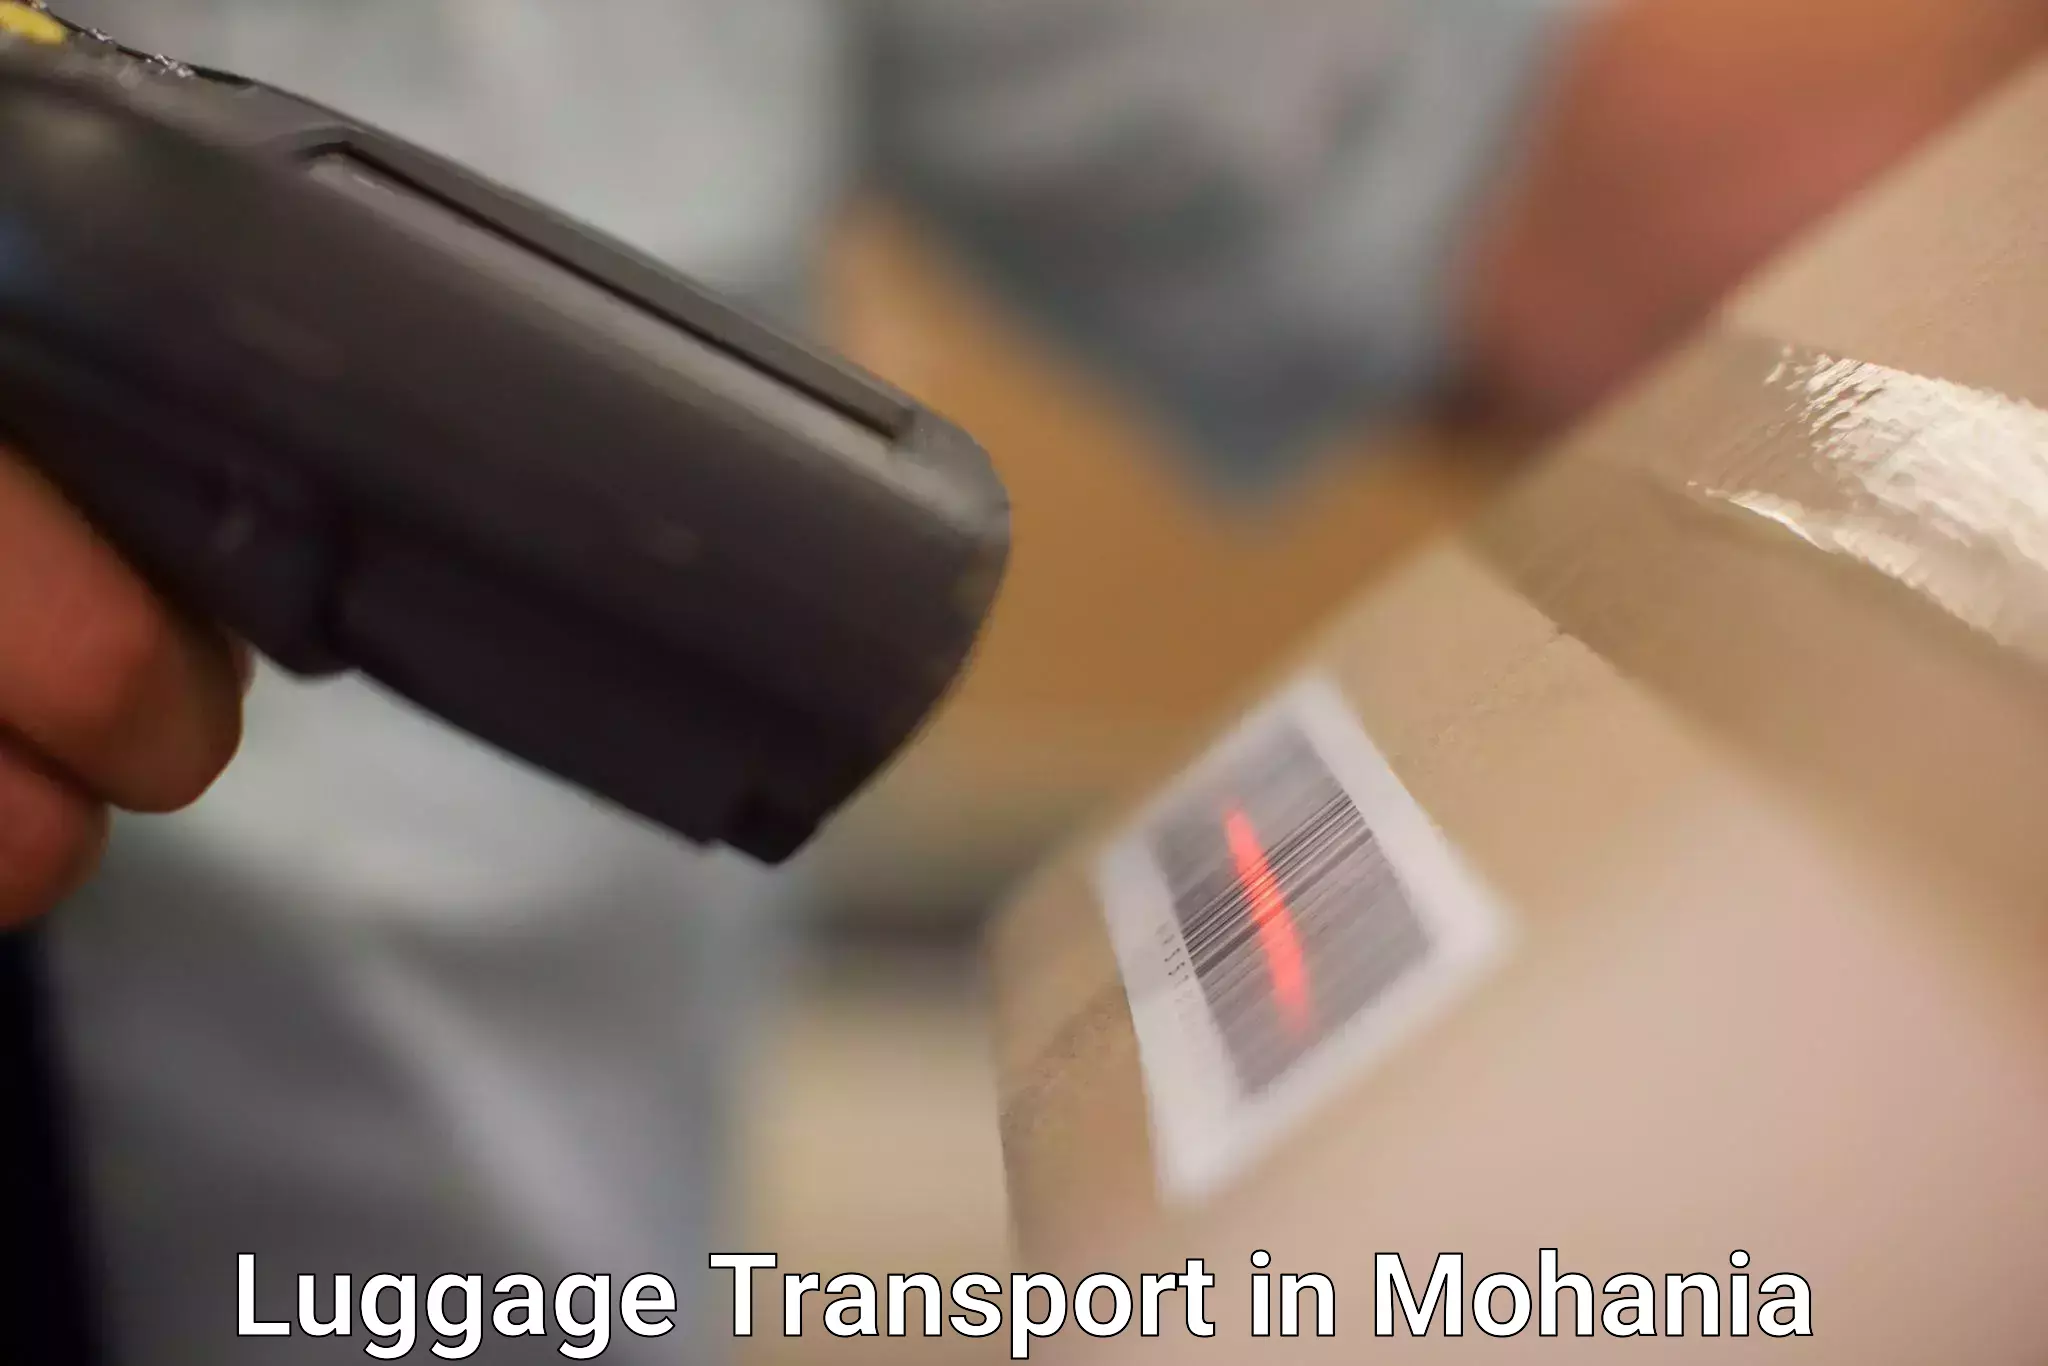 Baggage relocation service in Mohania